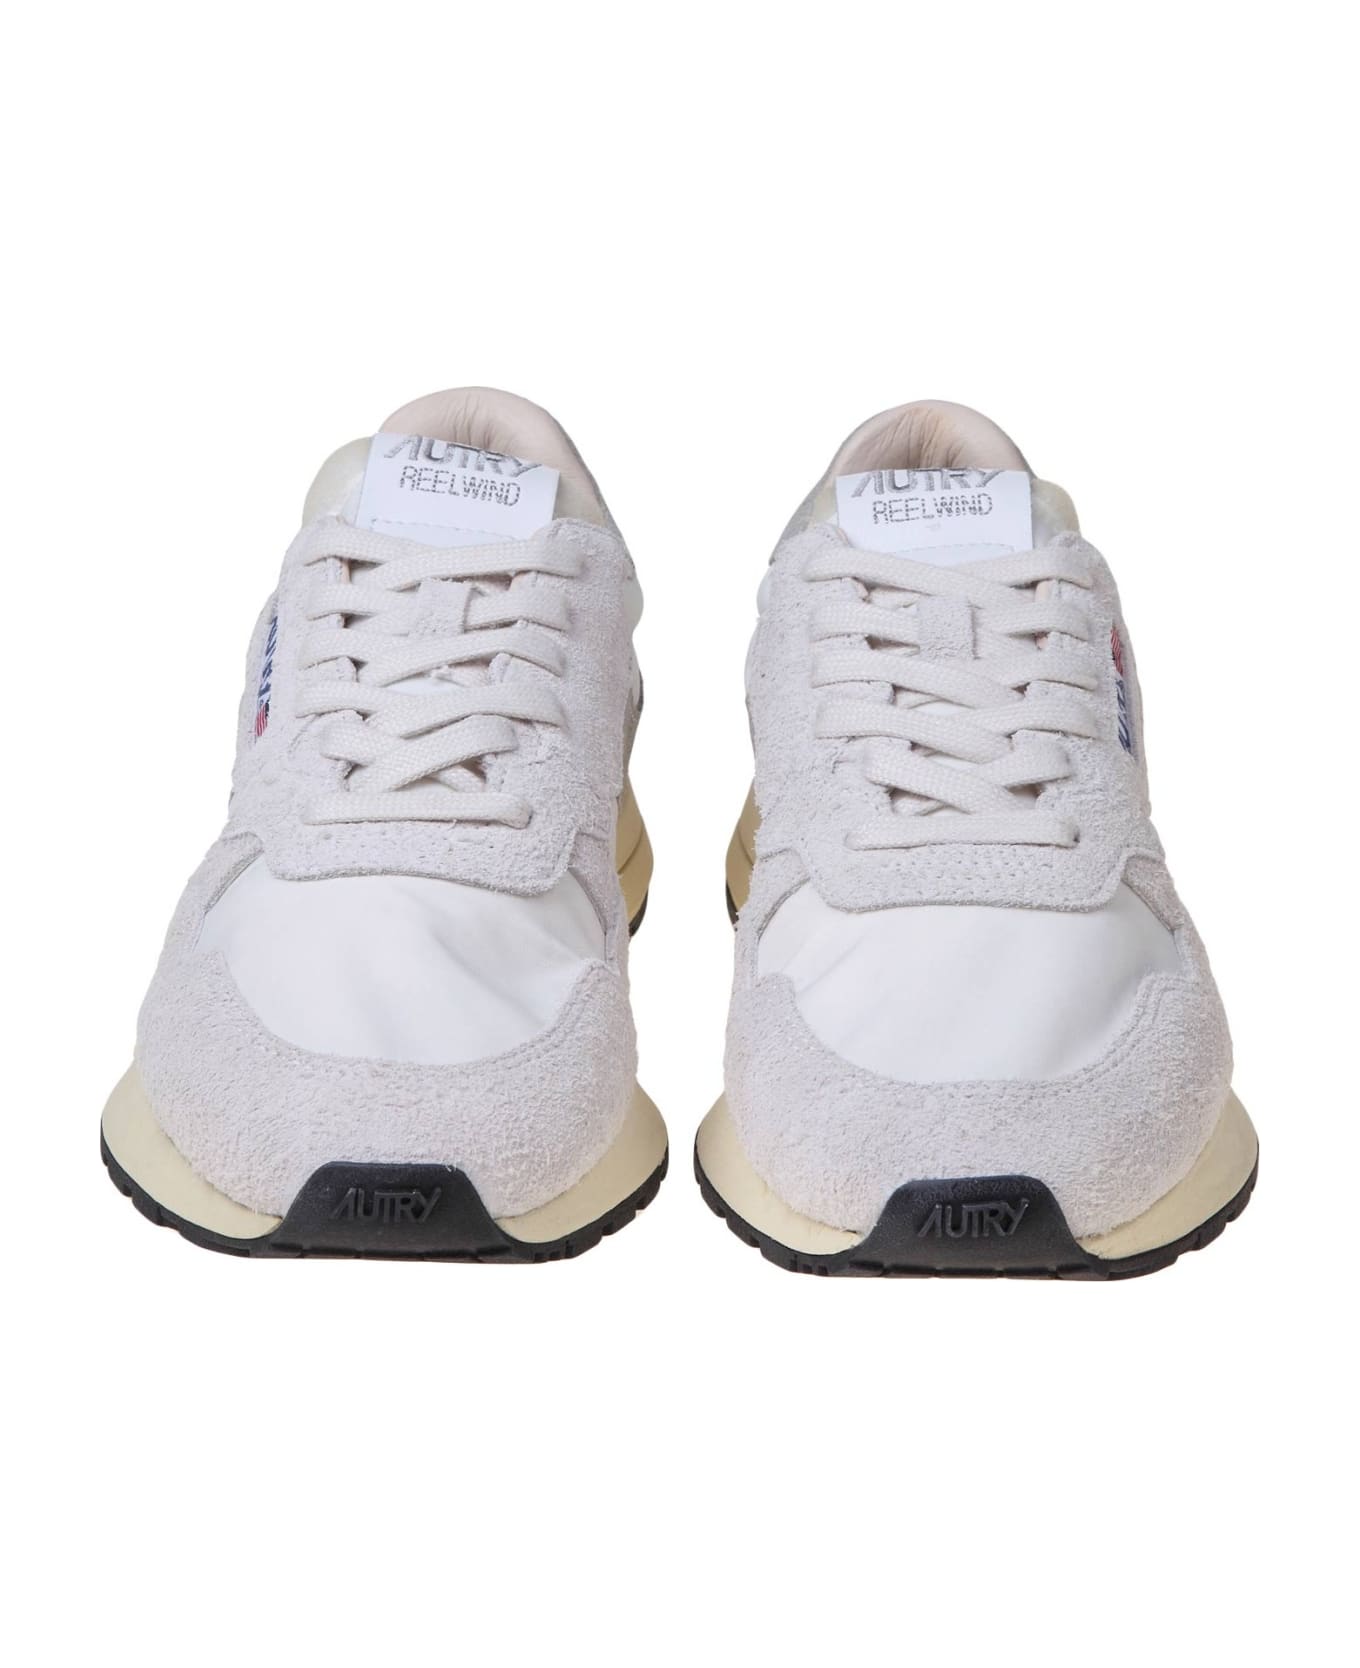 Autry Reelwind Low Sneakers In White Suede And Nylon - WHITE